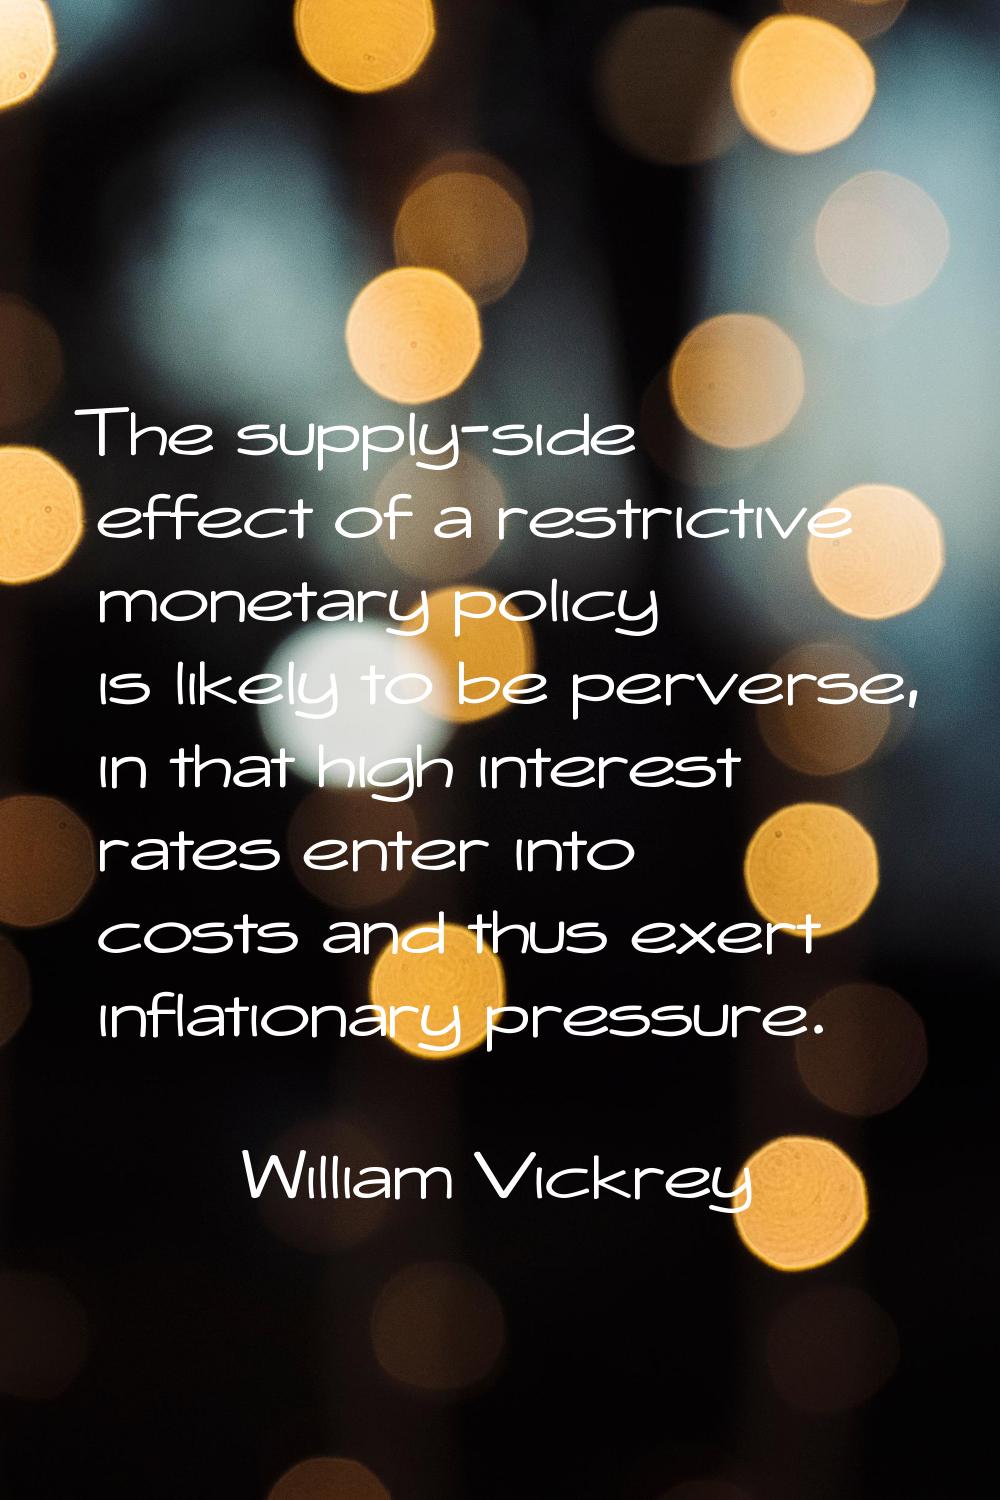 The supply-side effect of a restrictive monetary policy is likely to be perverse, in that high inte